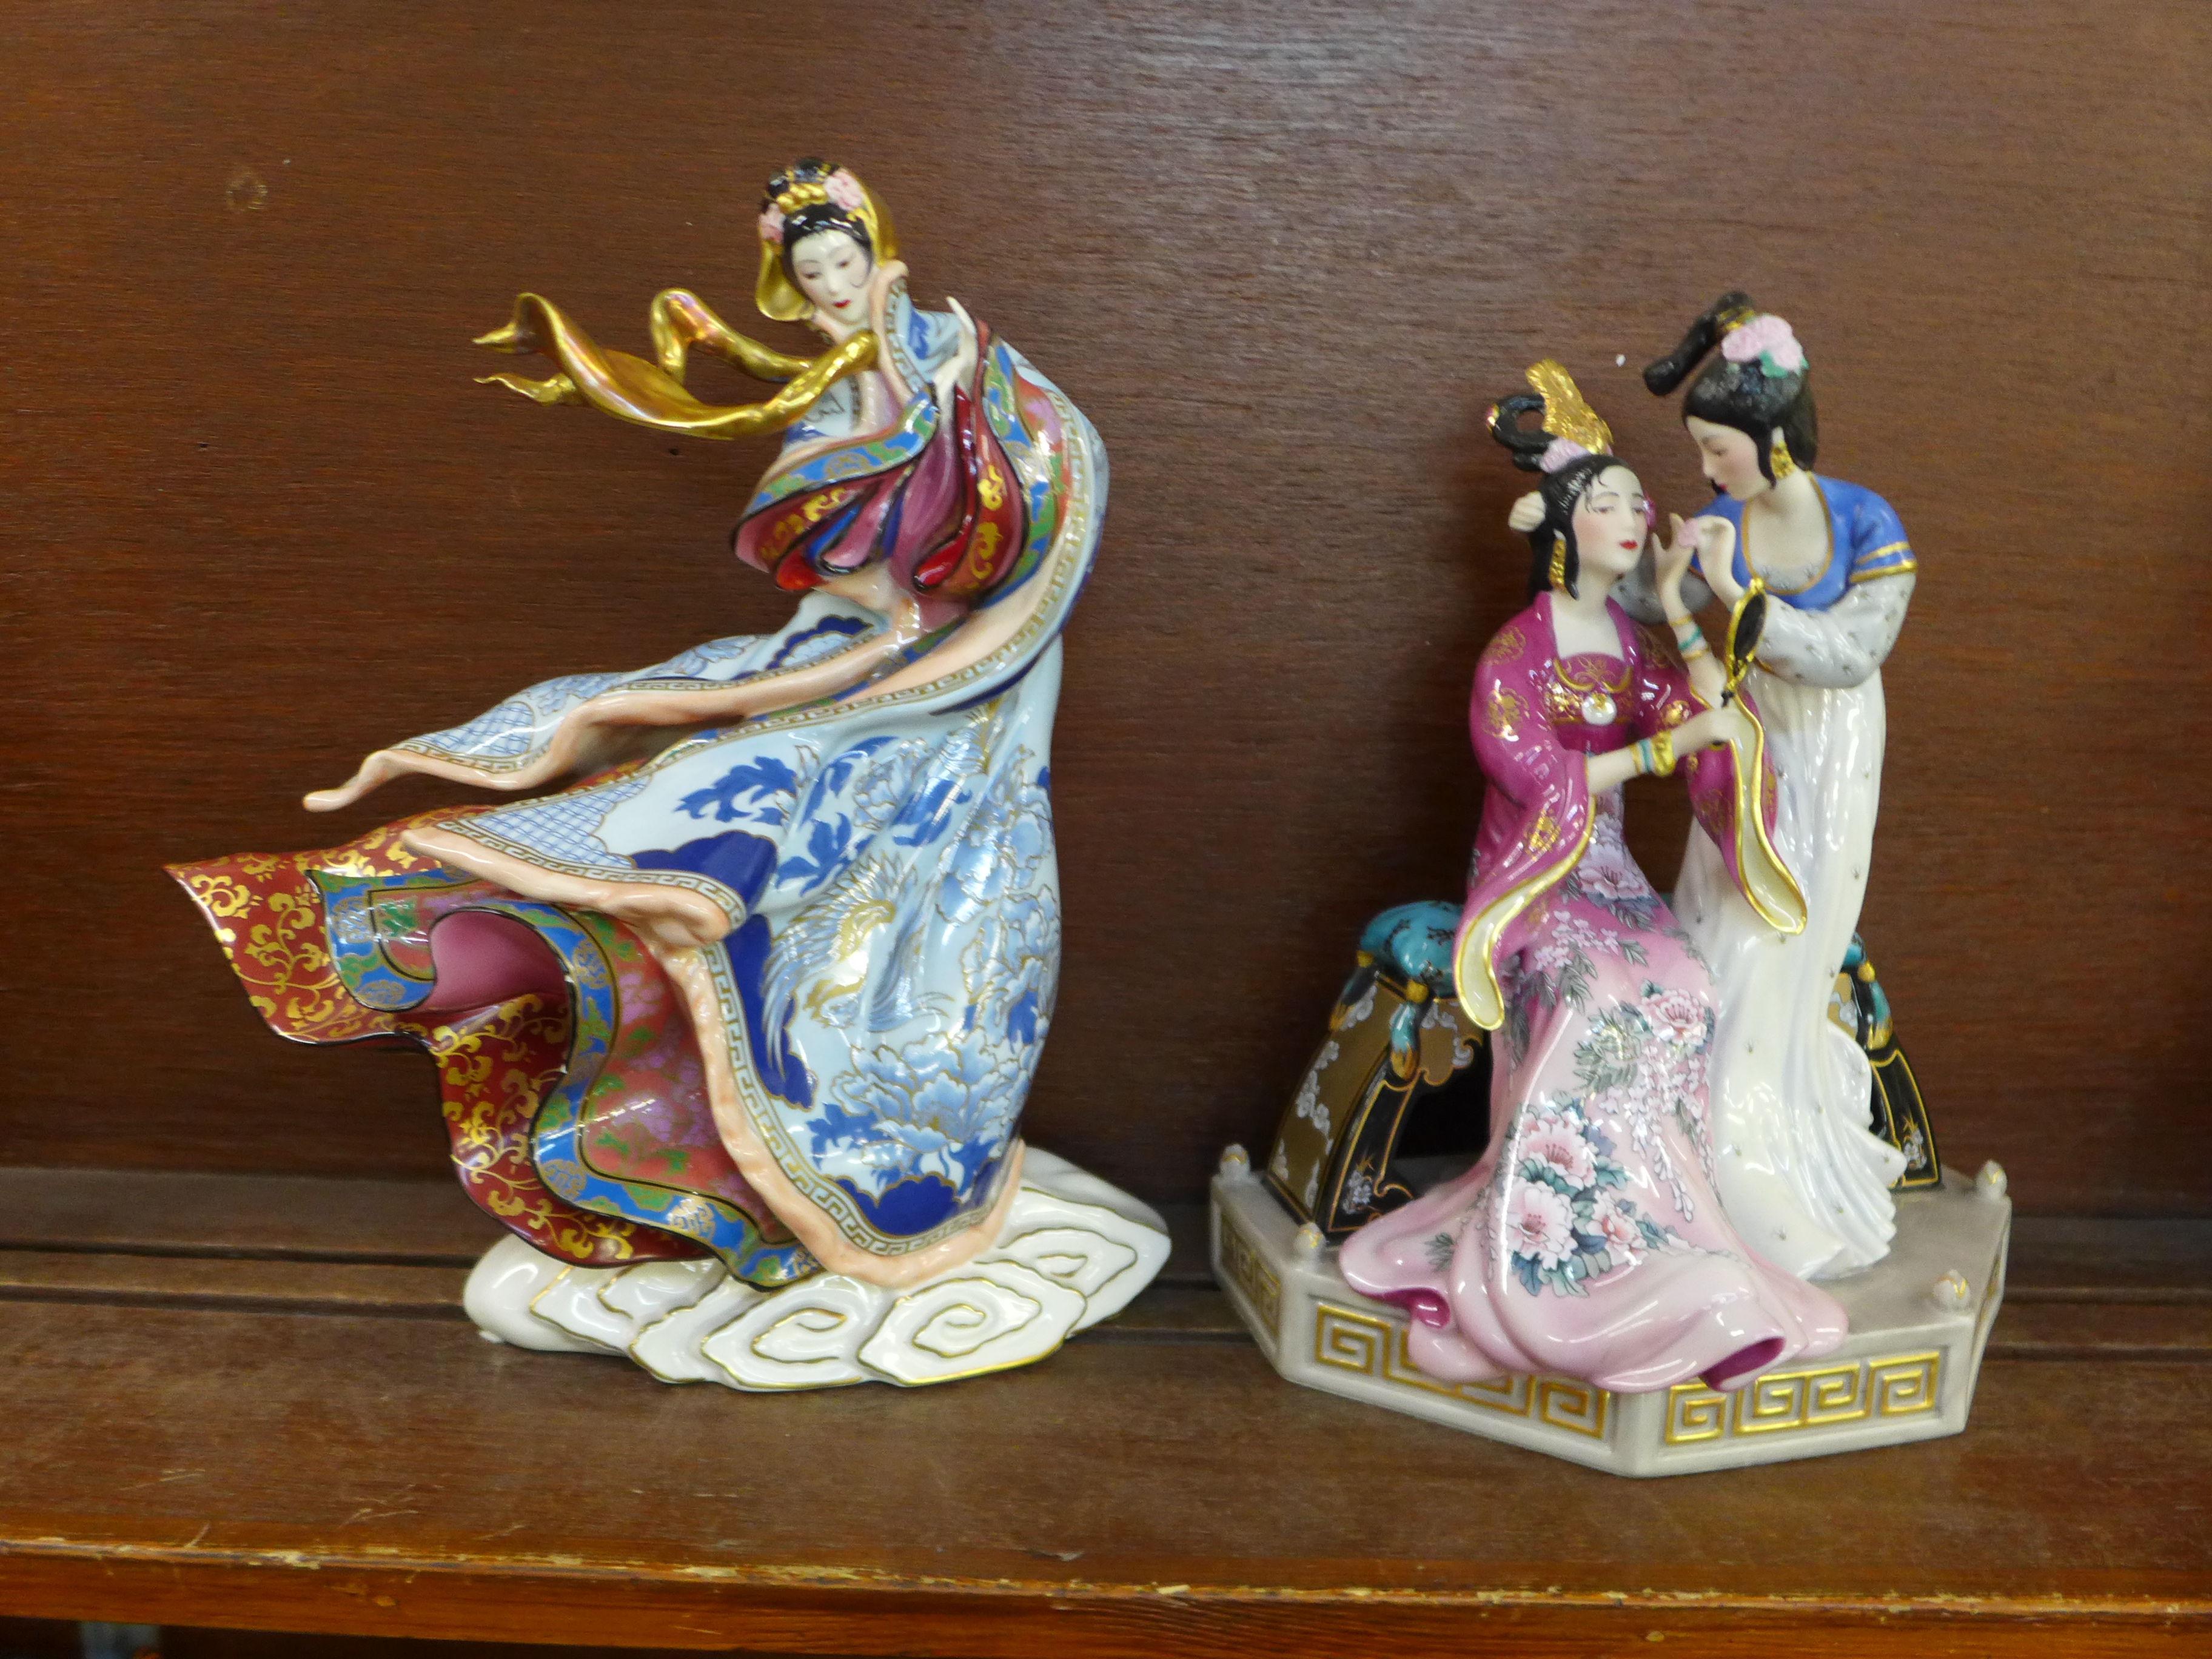 Two Franklin Mint figures, Sisters of Spring and Empress of The Snow